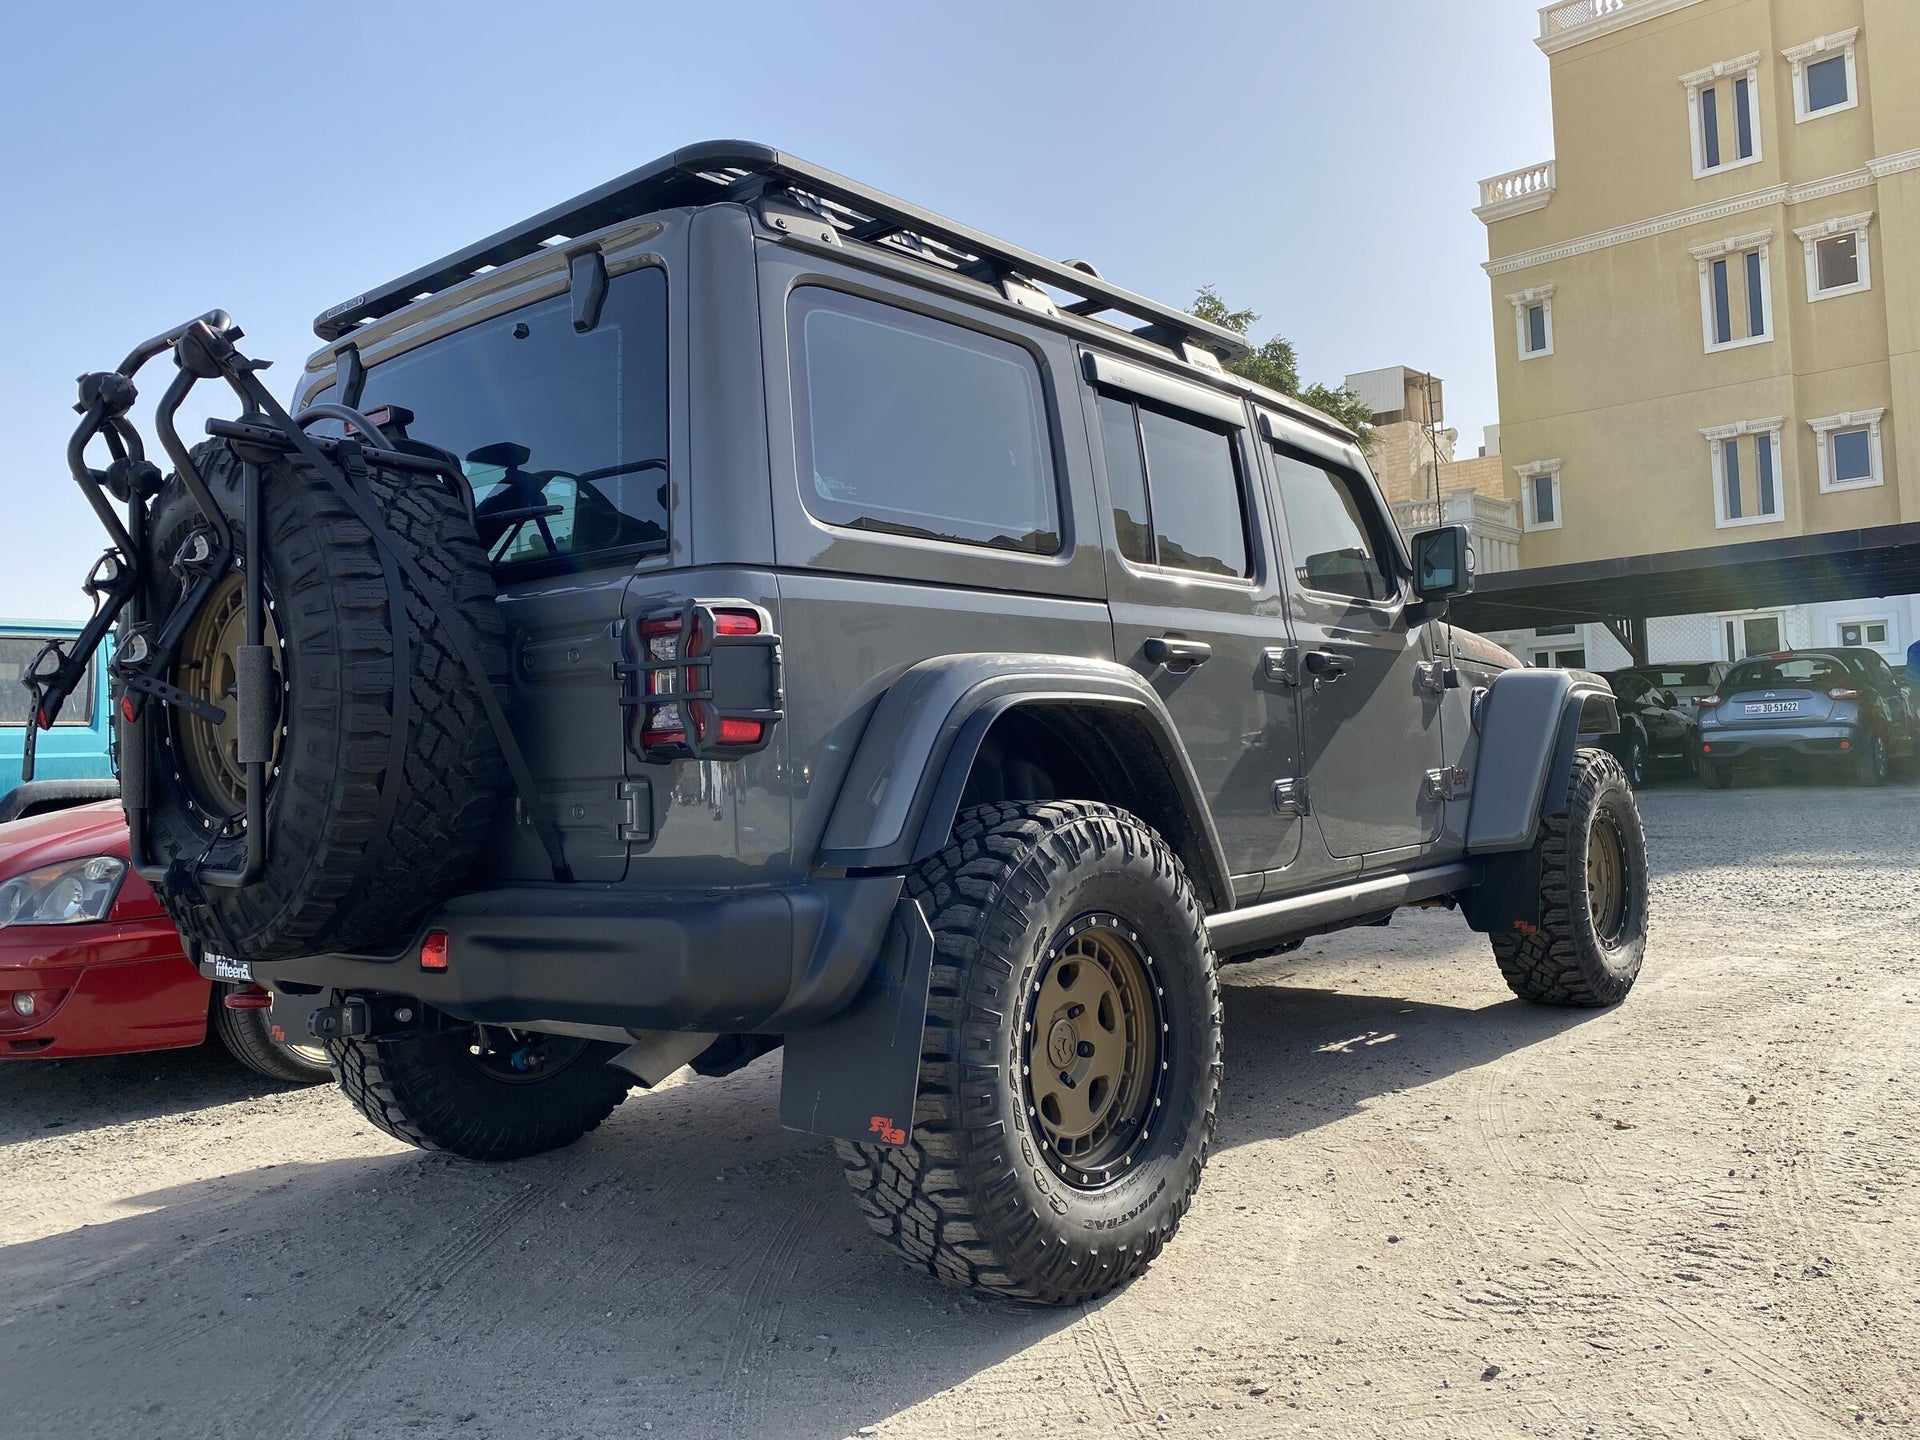 JL Xtreme Recon Fender Flare Extensions for JK? | Jeep Wrangler Forum